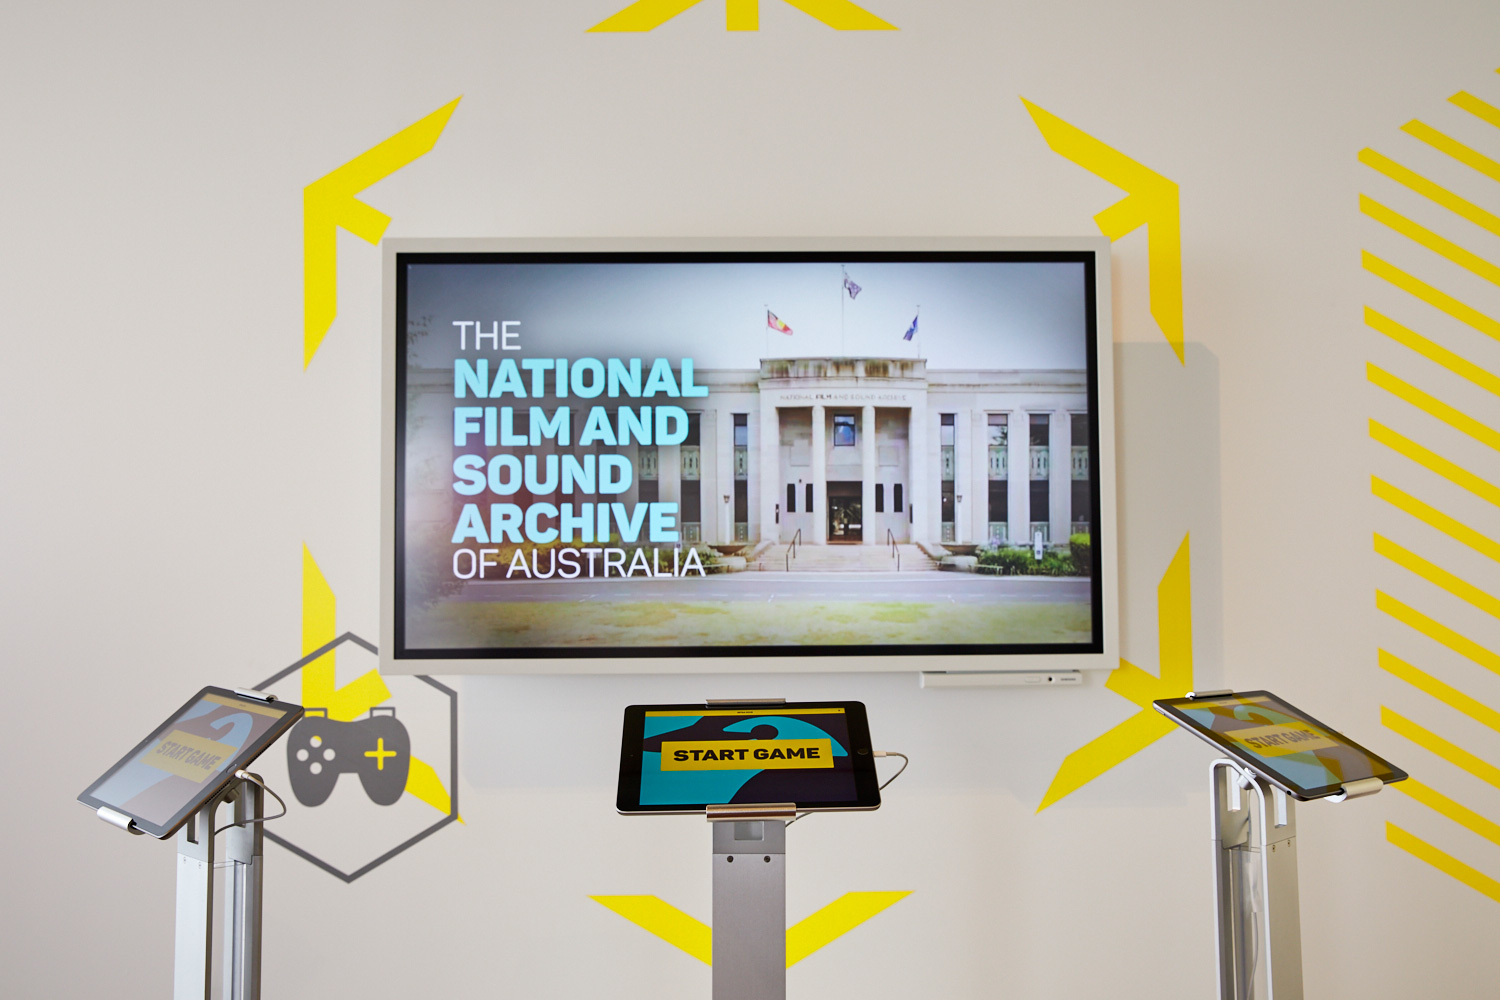 A large wall-mounted screen shows text saying 'The National Film and Sound Archive of Australia'. There are three ipads on stands in front of it displaying the graphics for the NFSA trivia game.